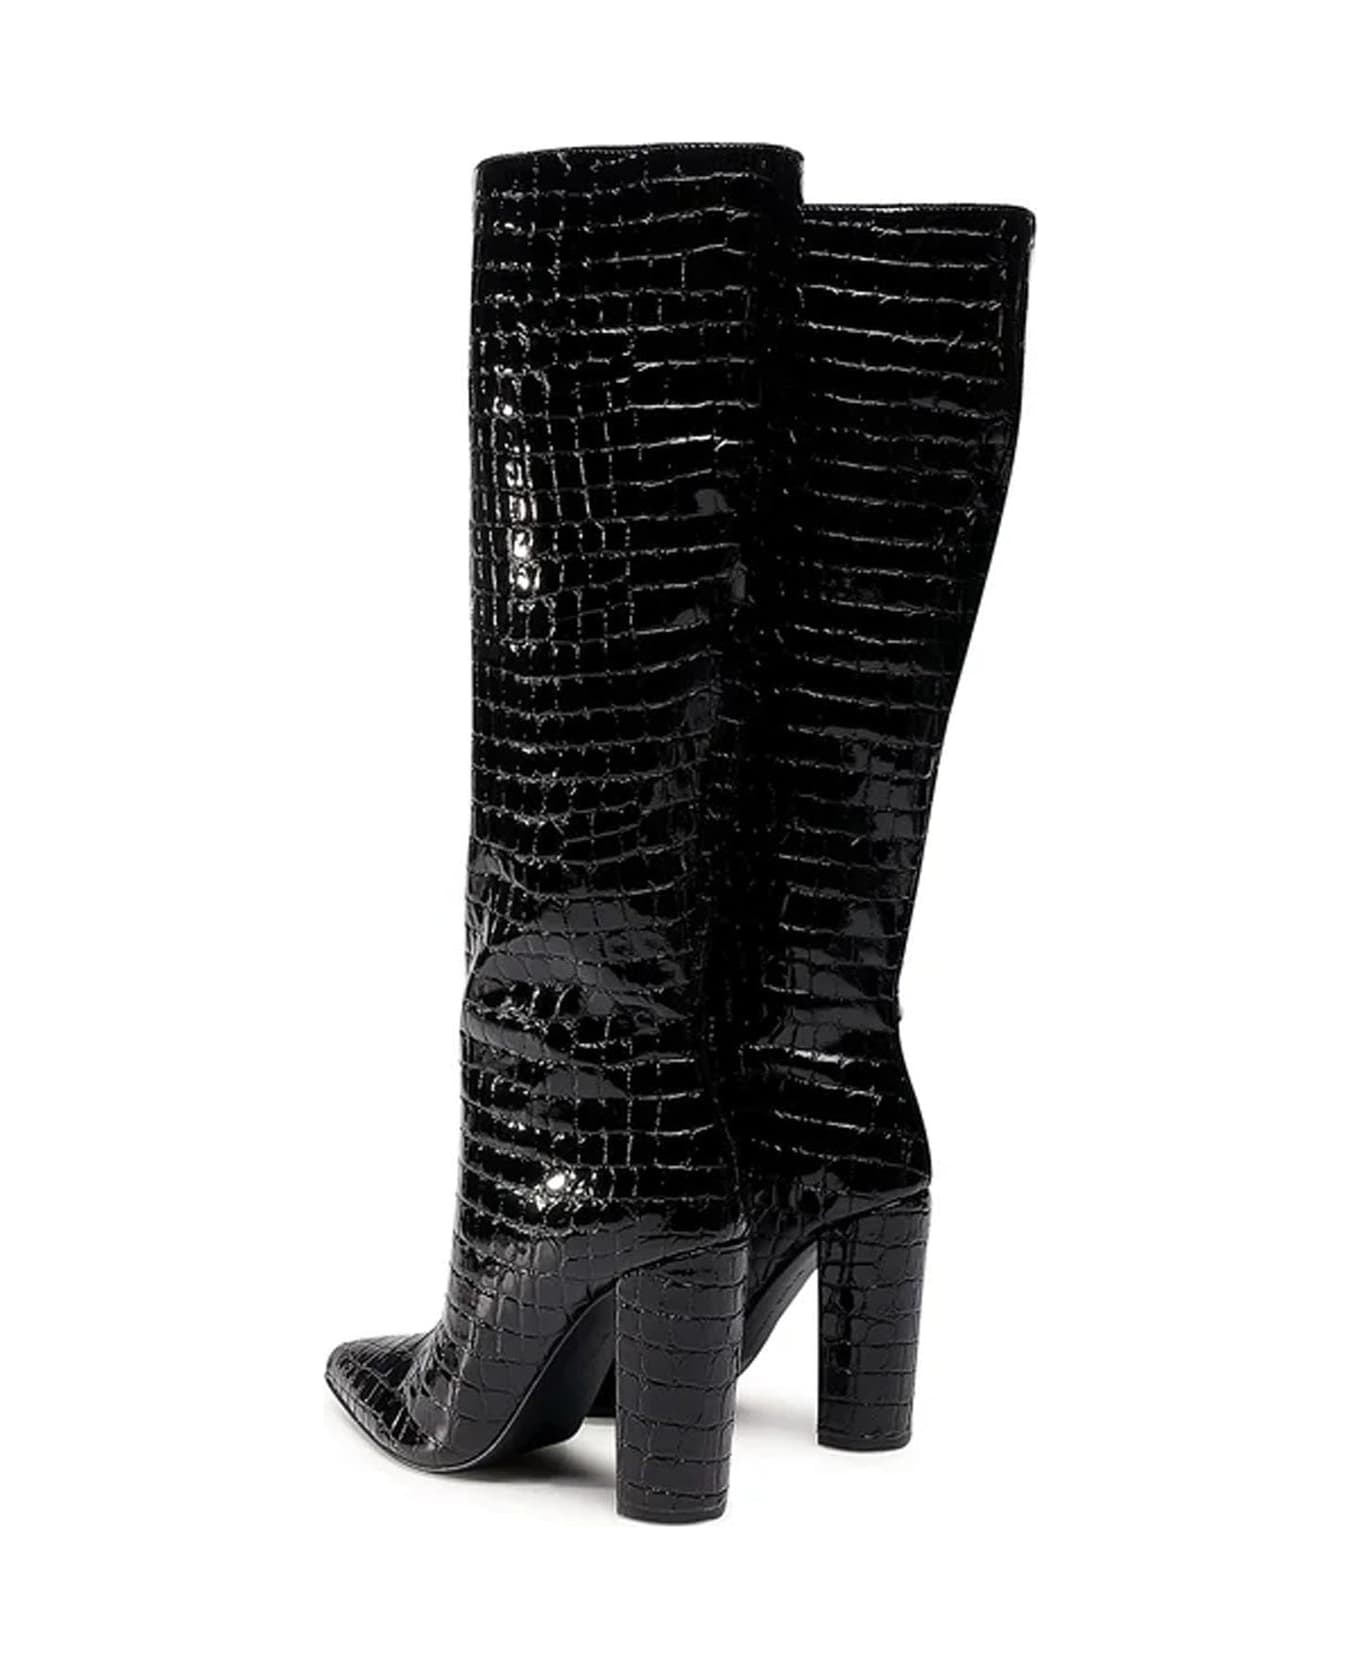 Steve Madden Leather Boots - Black ブーツ